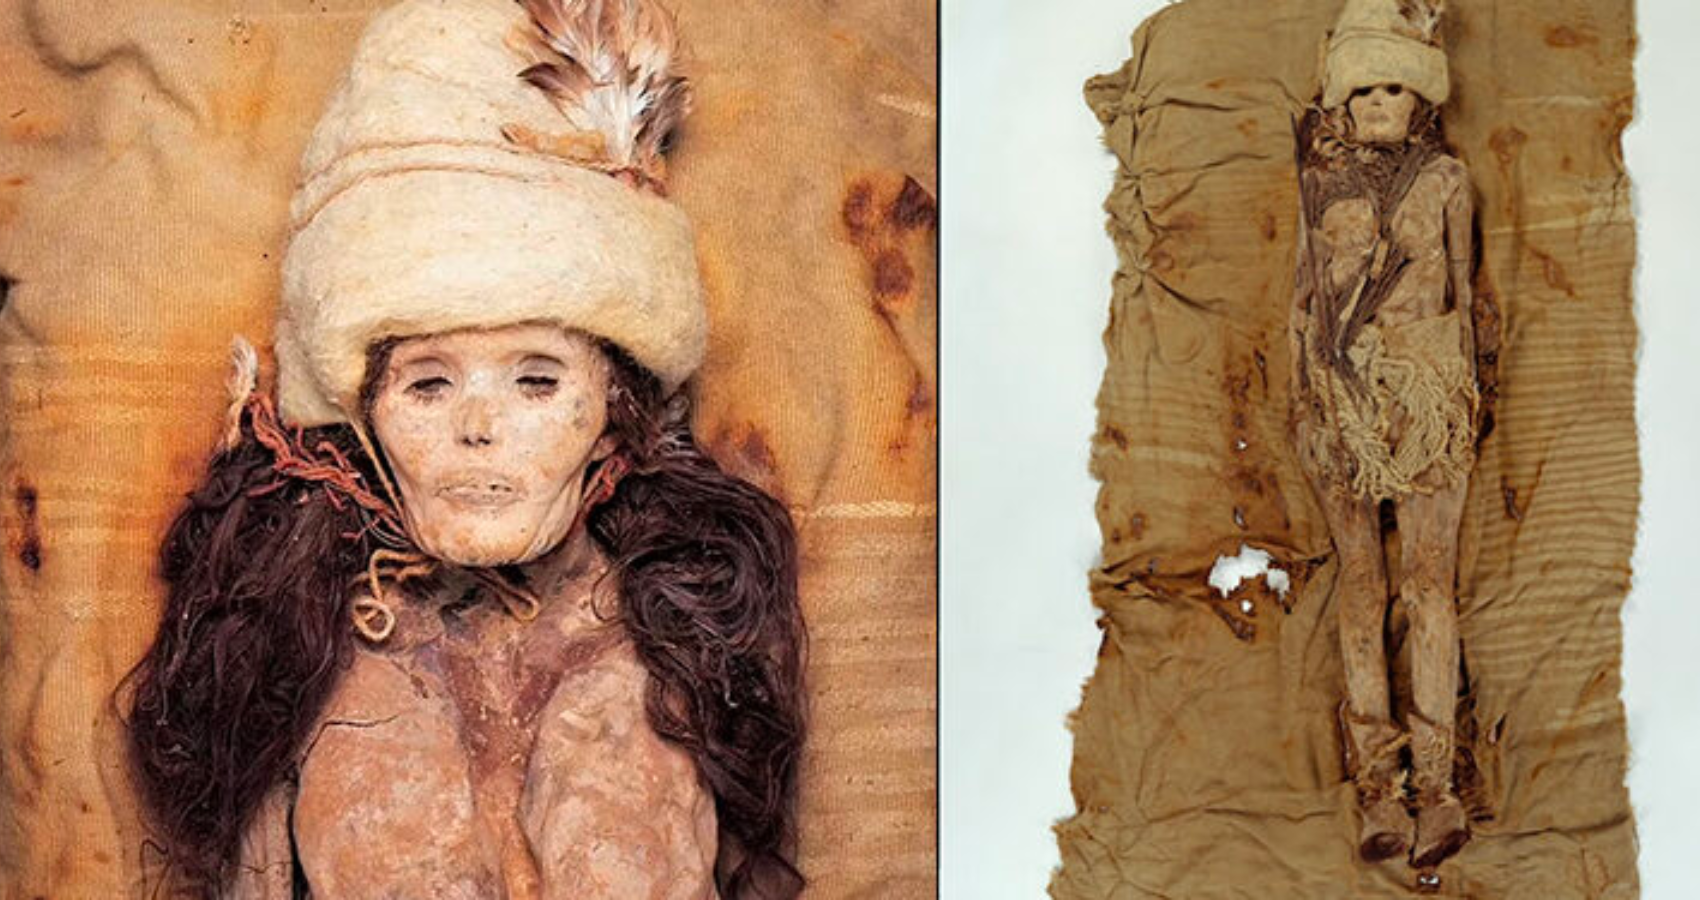 Mummies dating from between 2,000 B.C. to 200 A.D. were uncovered in tombs in the Tarim Basin in northwest China